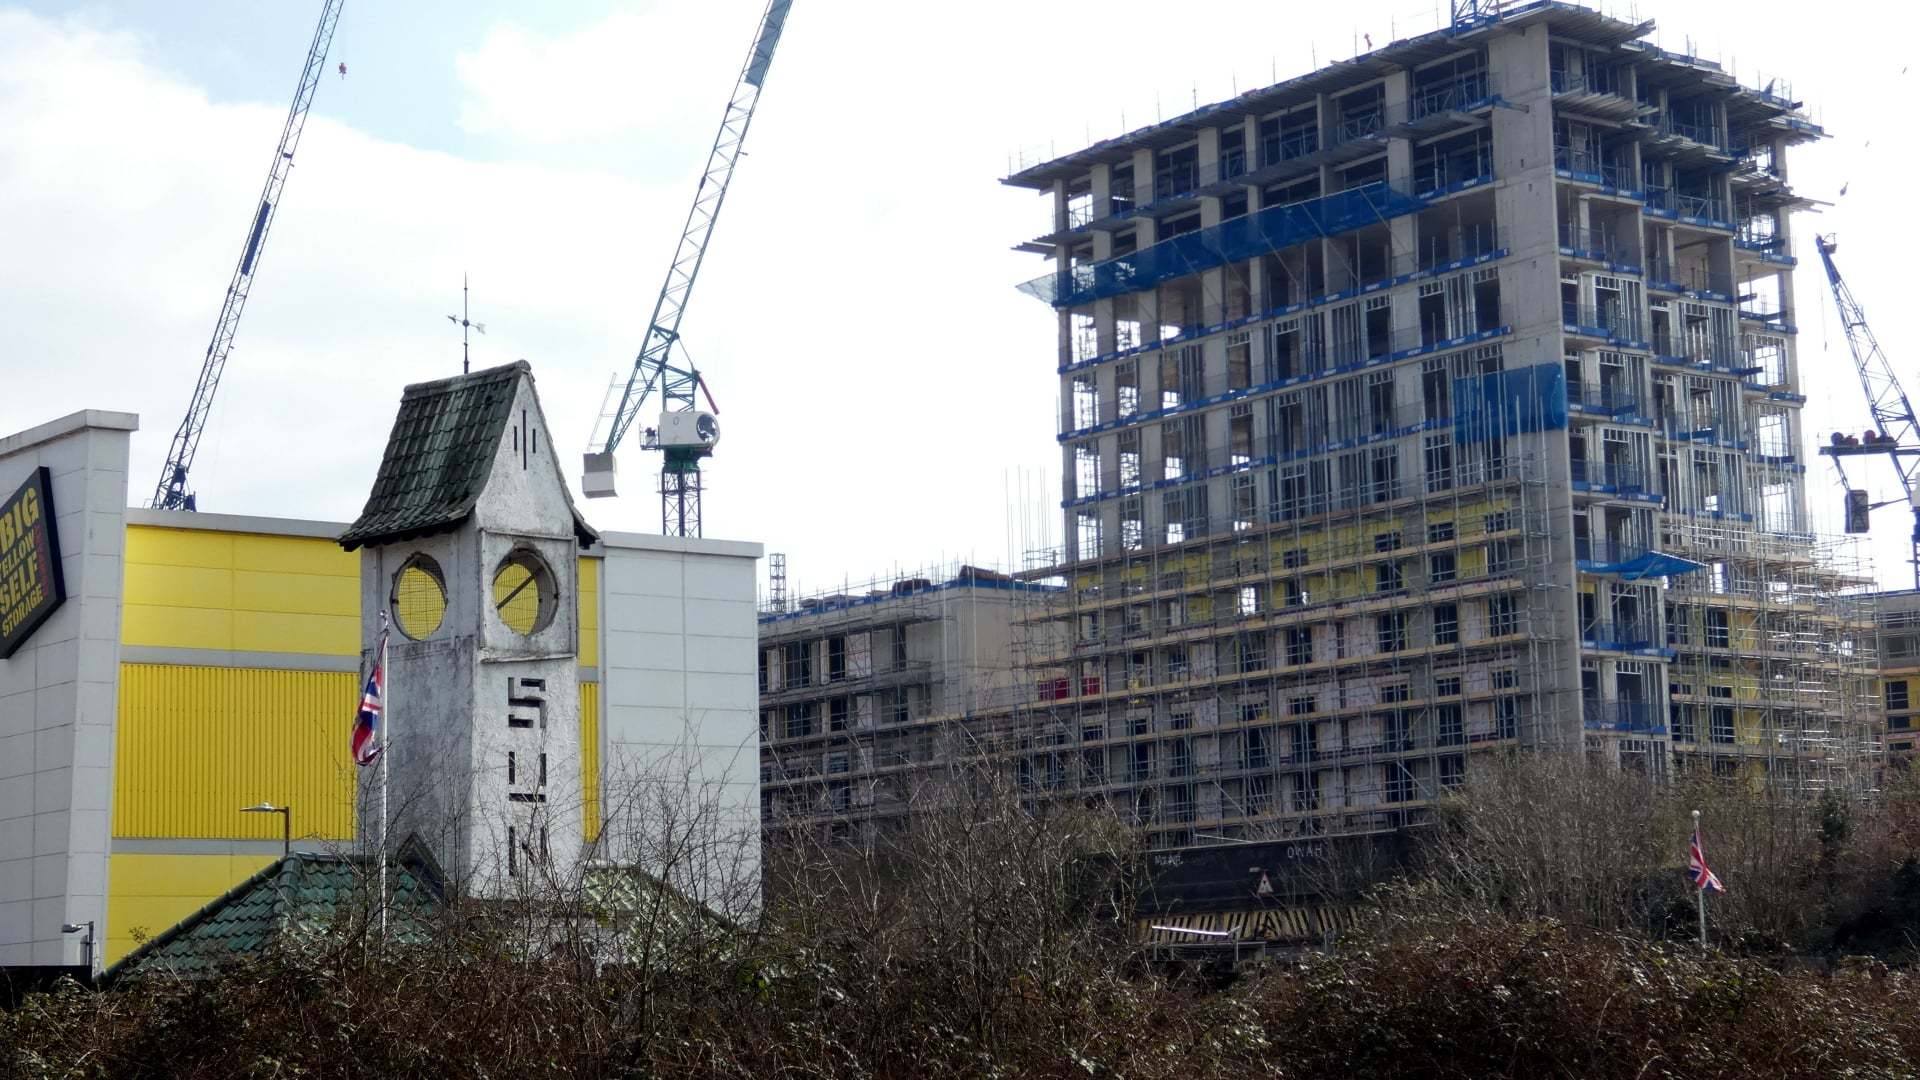 The construction of the 24 storey tower with the Sun Clock Tower, udner threat from demolition, in the foreground. Credit: Lynda Bullock/Watford Observer Camera Club